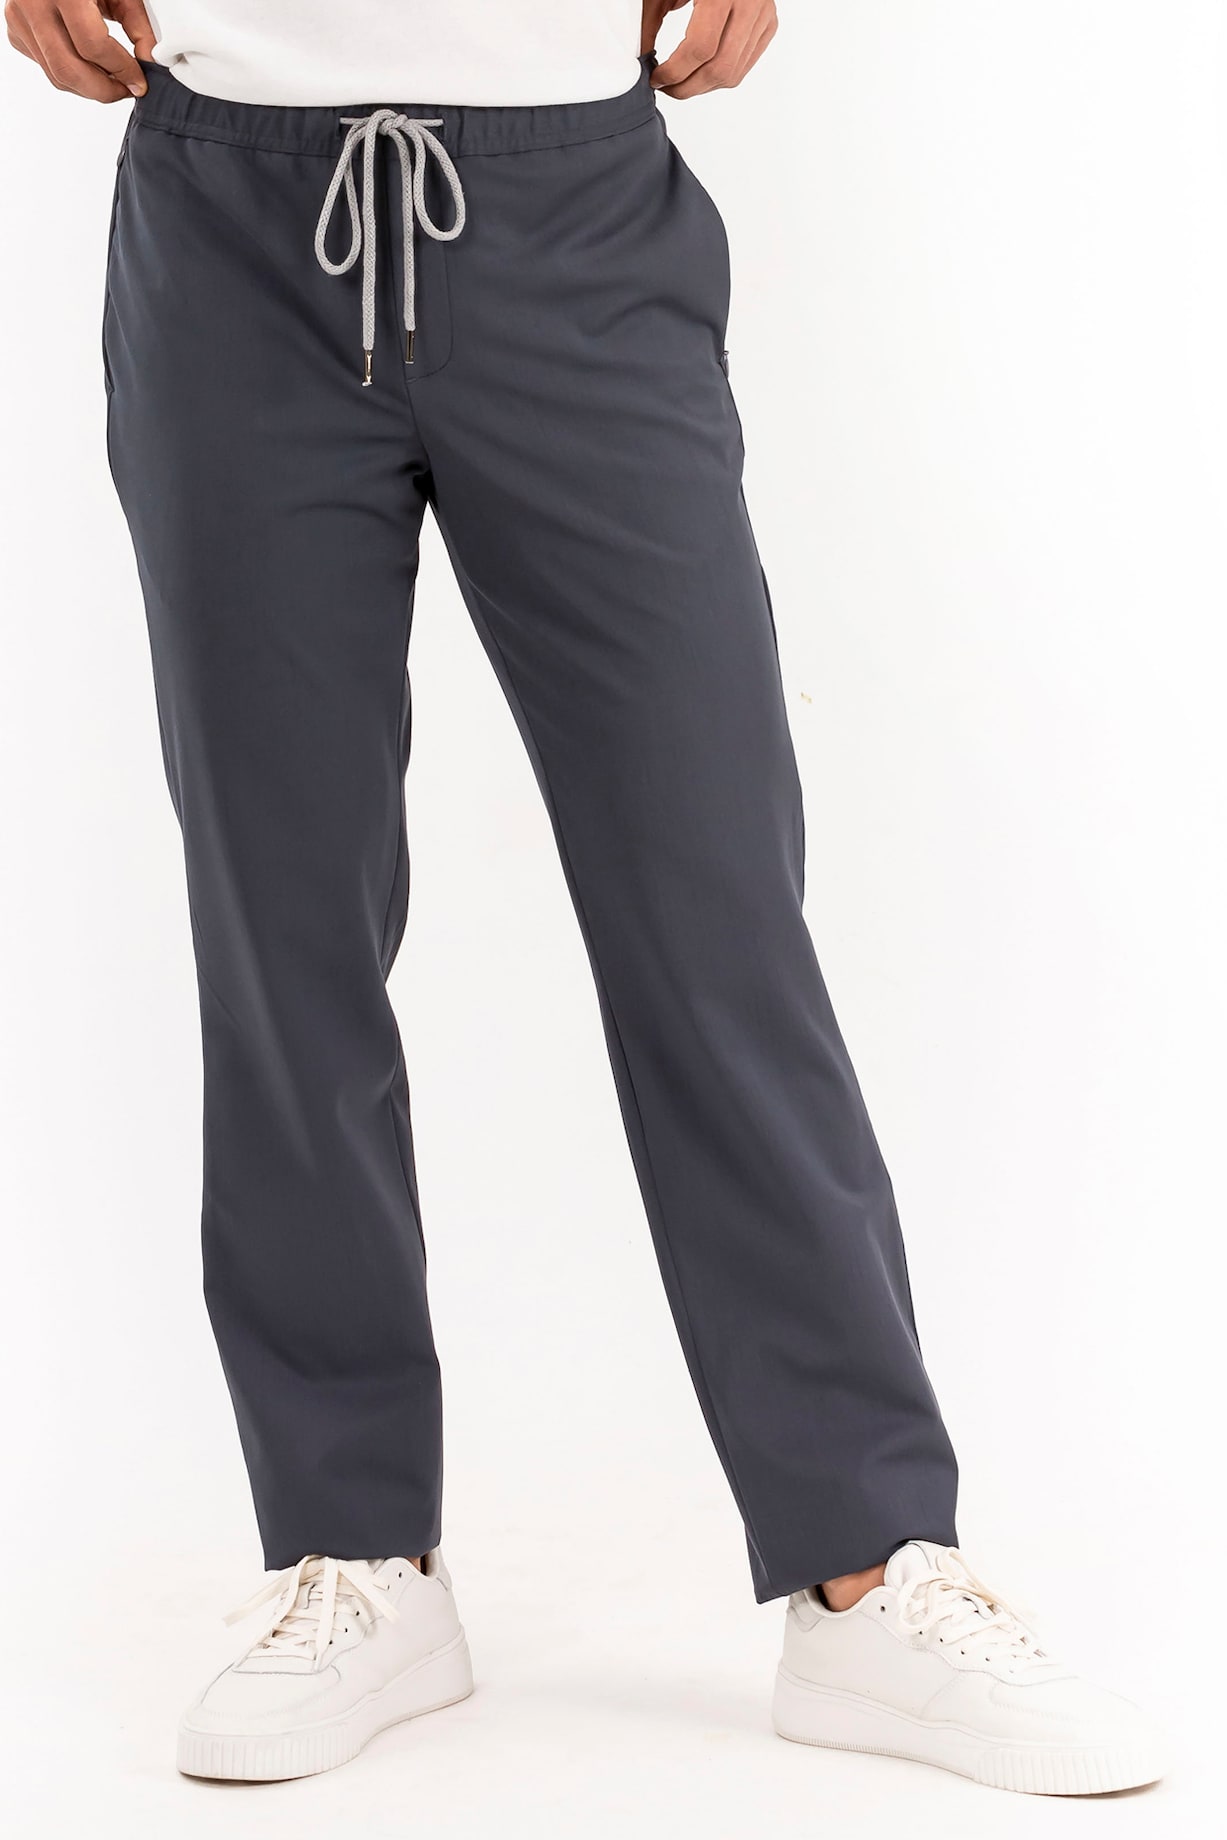 Grey All Weather Essential Stretch Joggers (Slim Fit) by THE PANT PROJECT